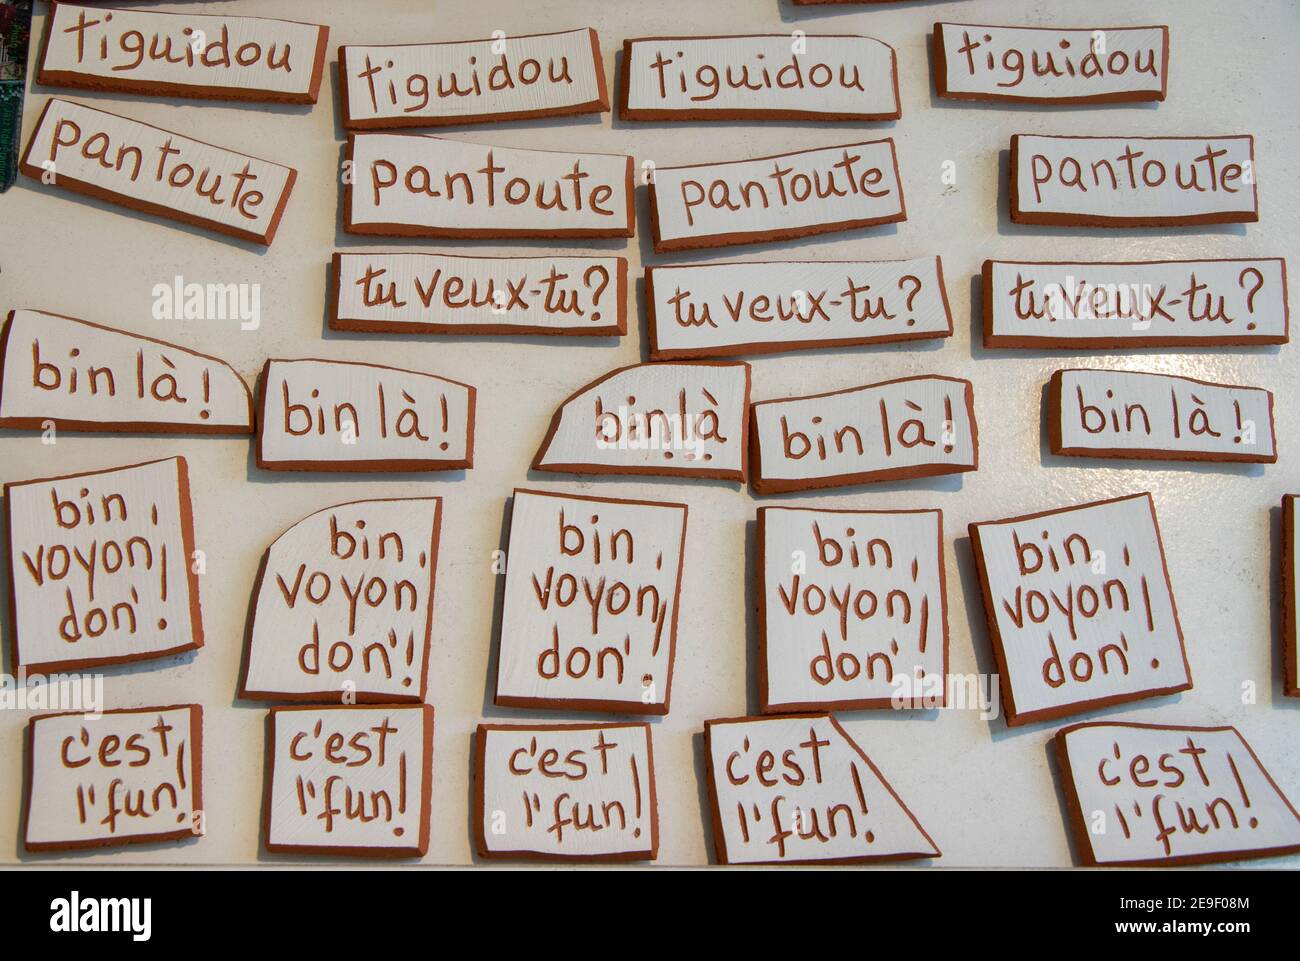 November 9, 2020 - Montreal, Qc, Canada: Quebecois French Canadian expressions on craft Terracotta fridge magnets in a souvenir shop, art design Stock Photo